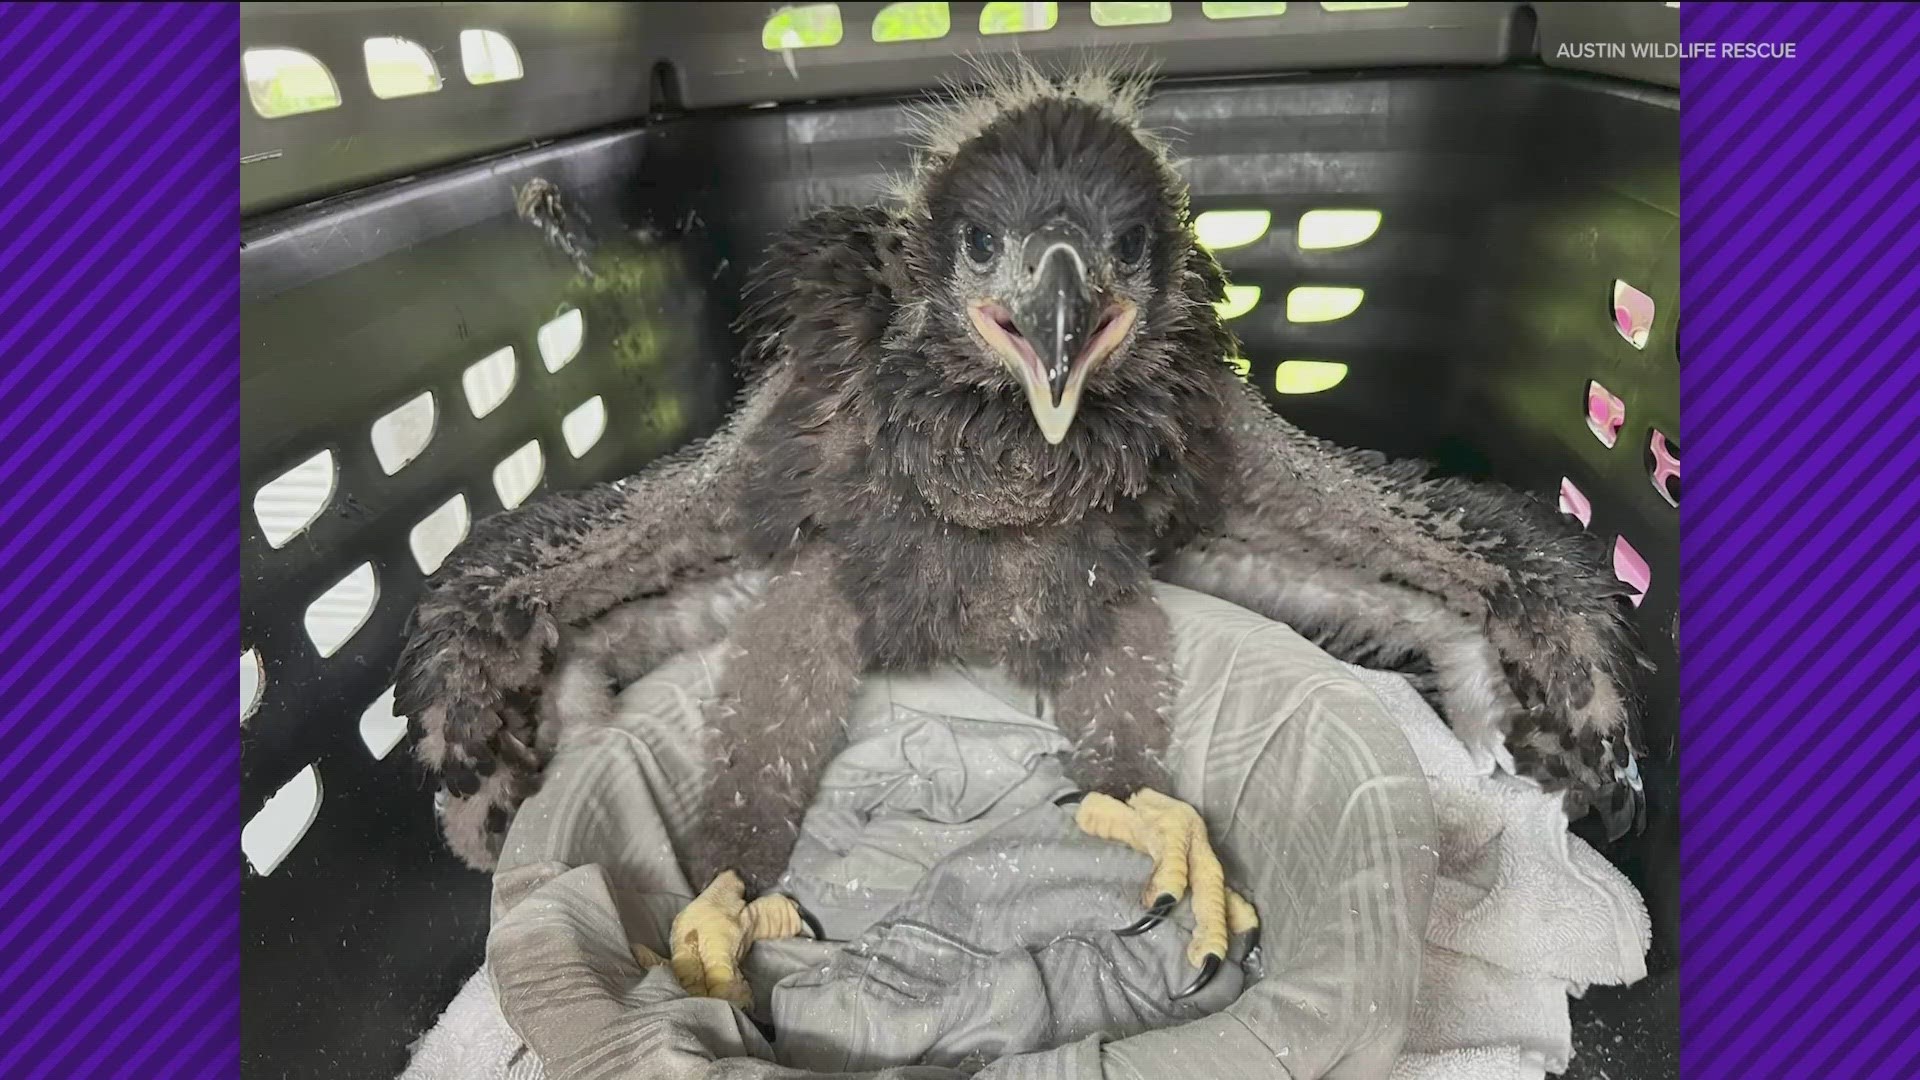 A baby bald eagle is on the mend after a storm knocked it out of a tree.